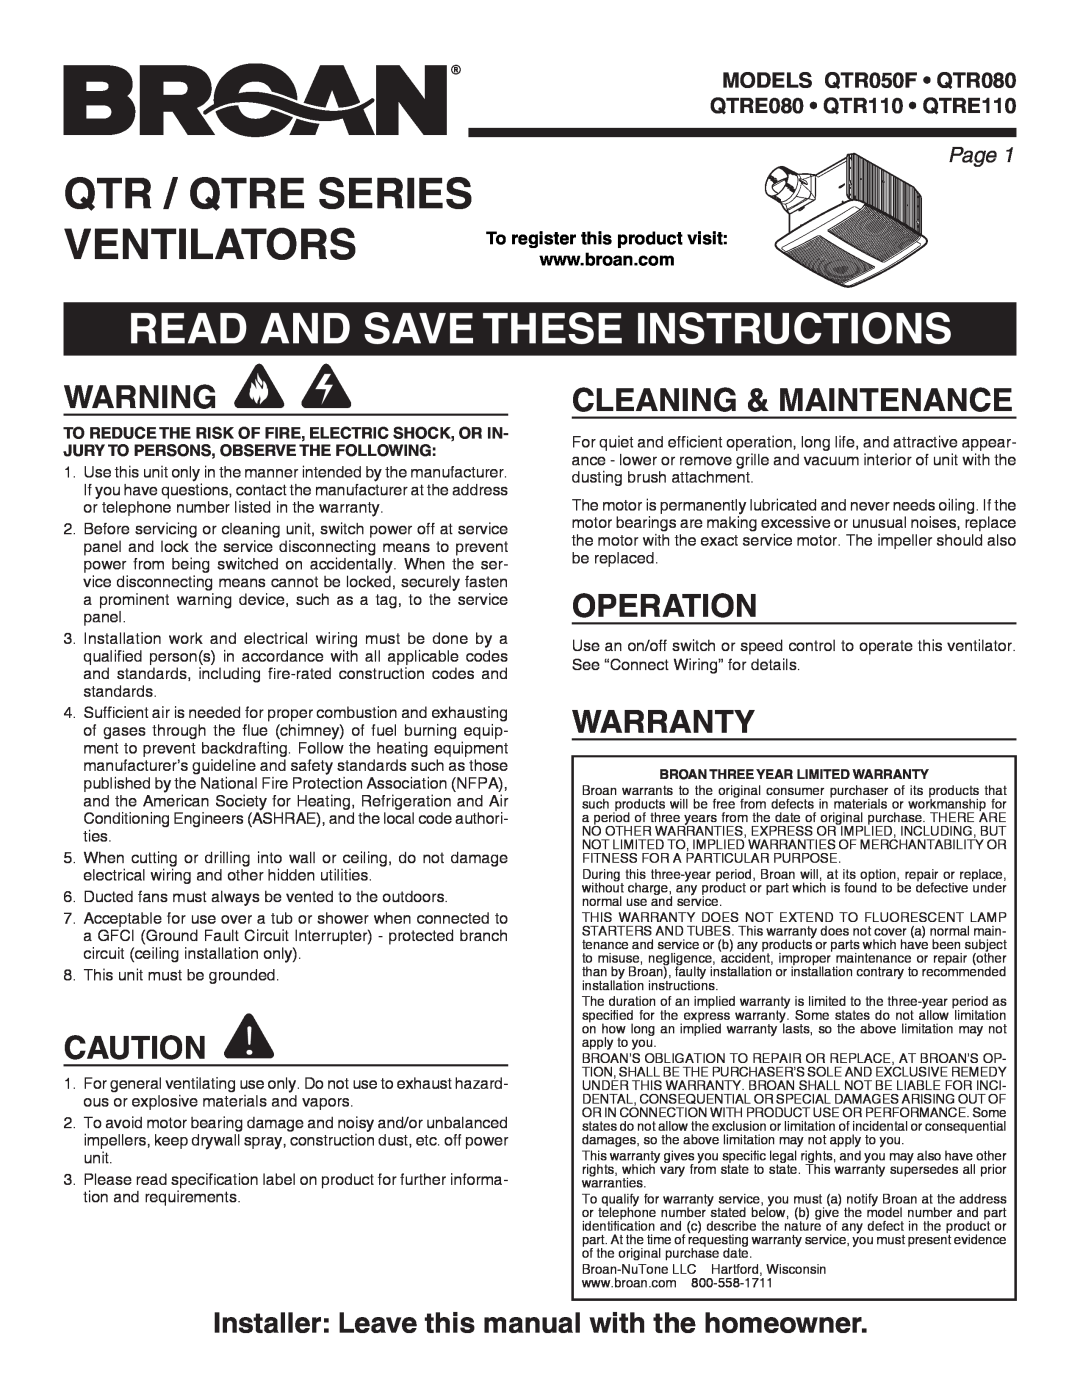 Broan QTRE080 manual Qtr / Qtre Series Ventilators, Read And Save These Instructions, Cleaning & Maintenance, Operation 